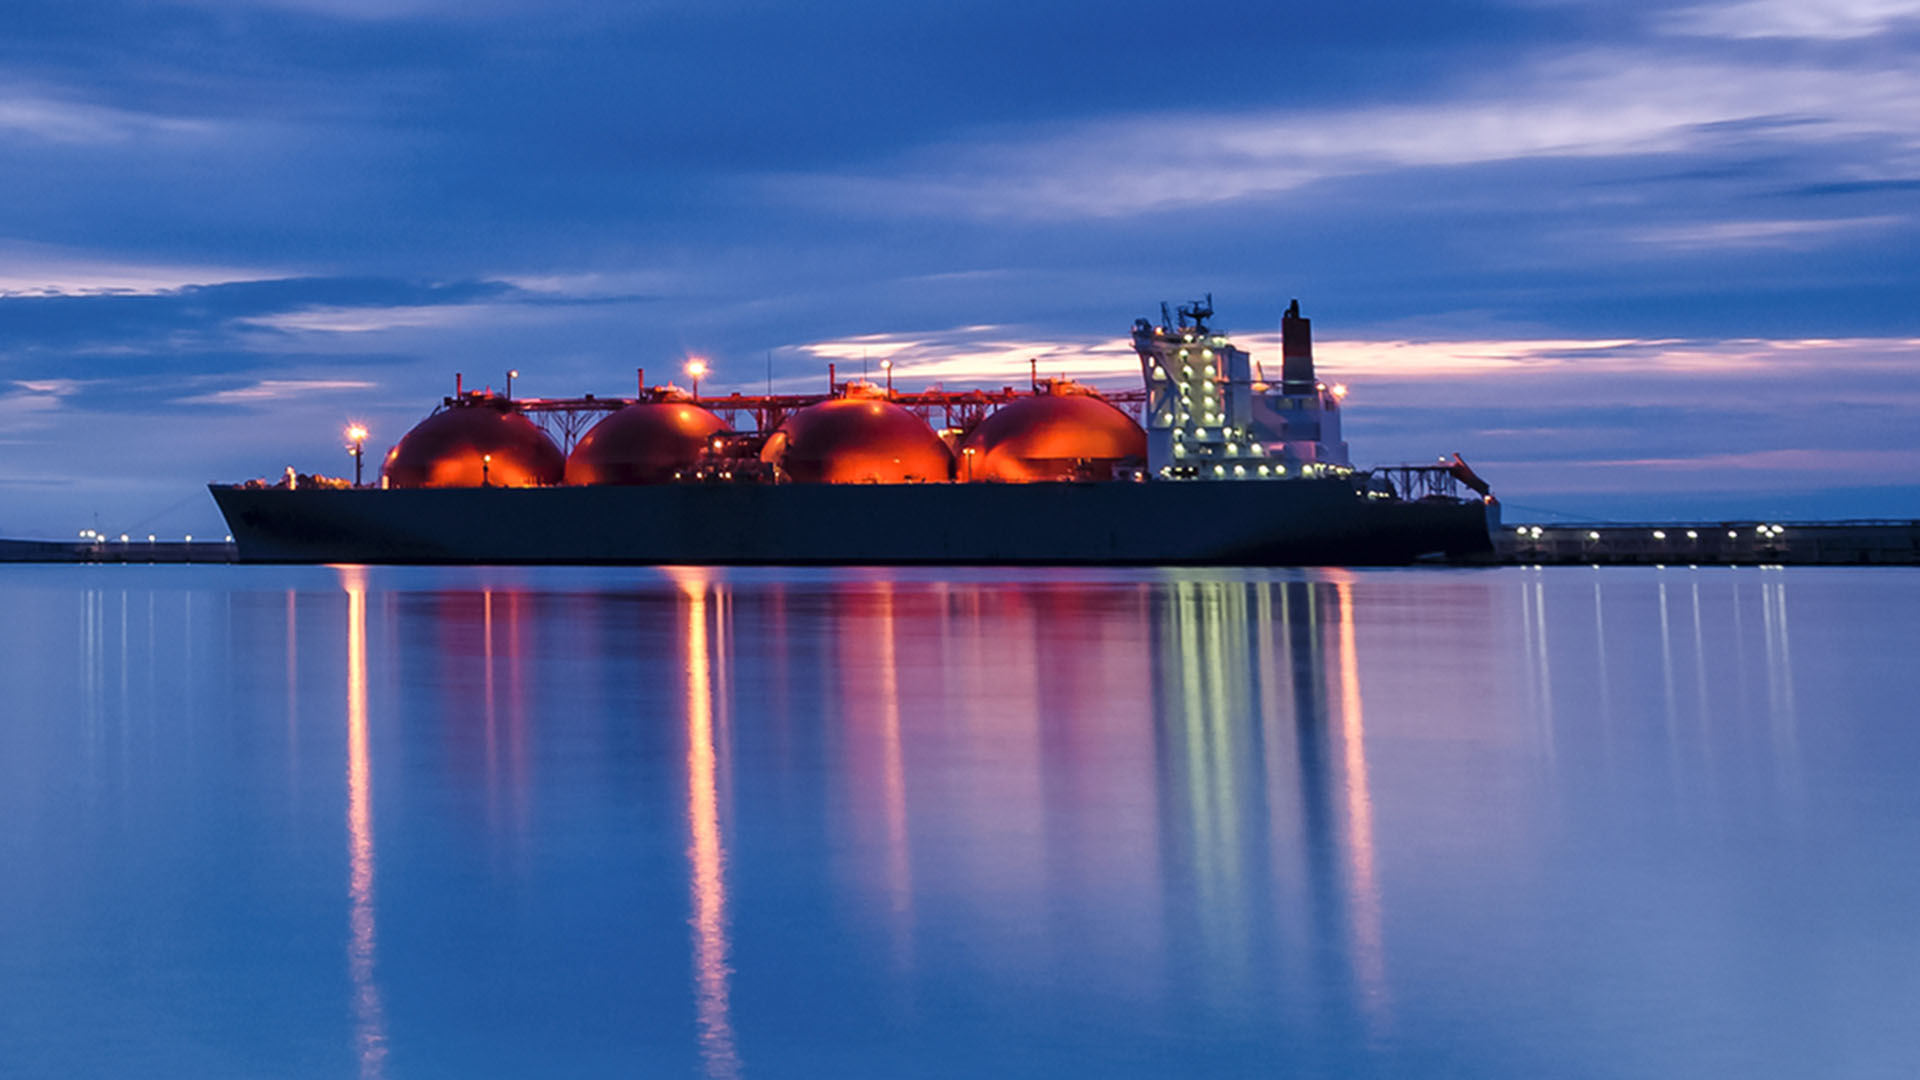 Image of a LNG tanker